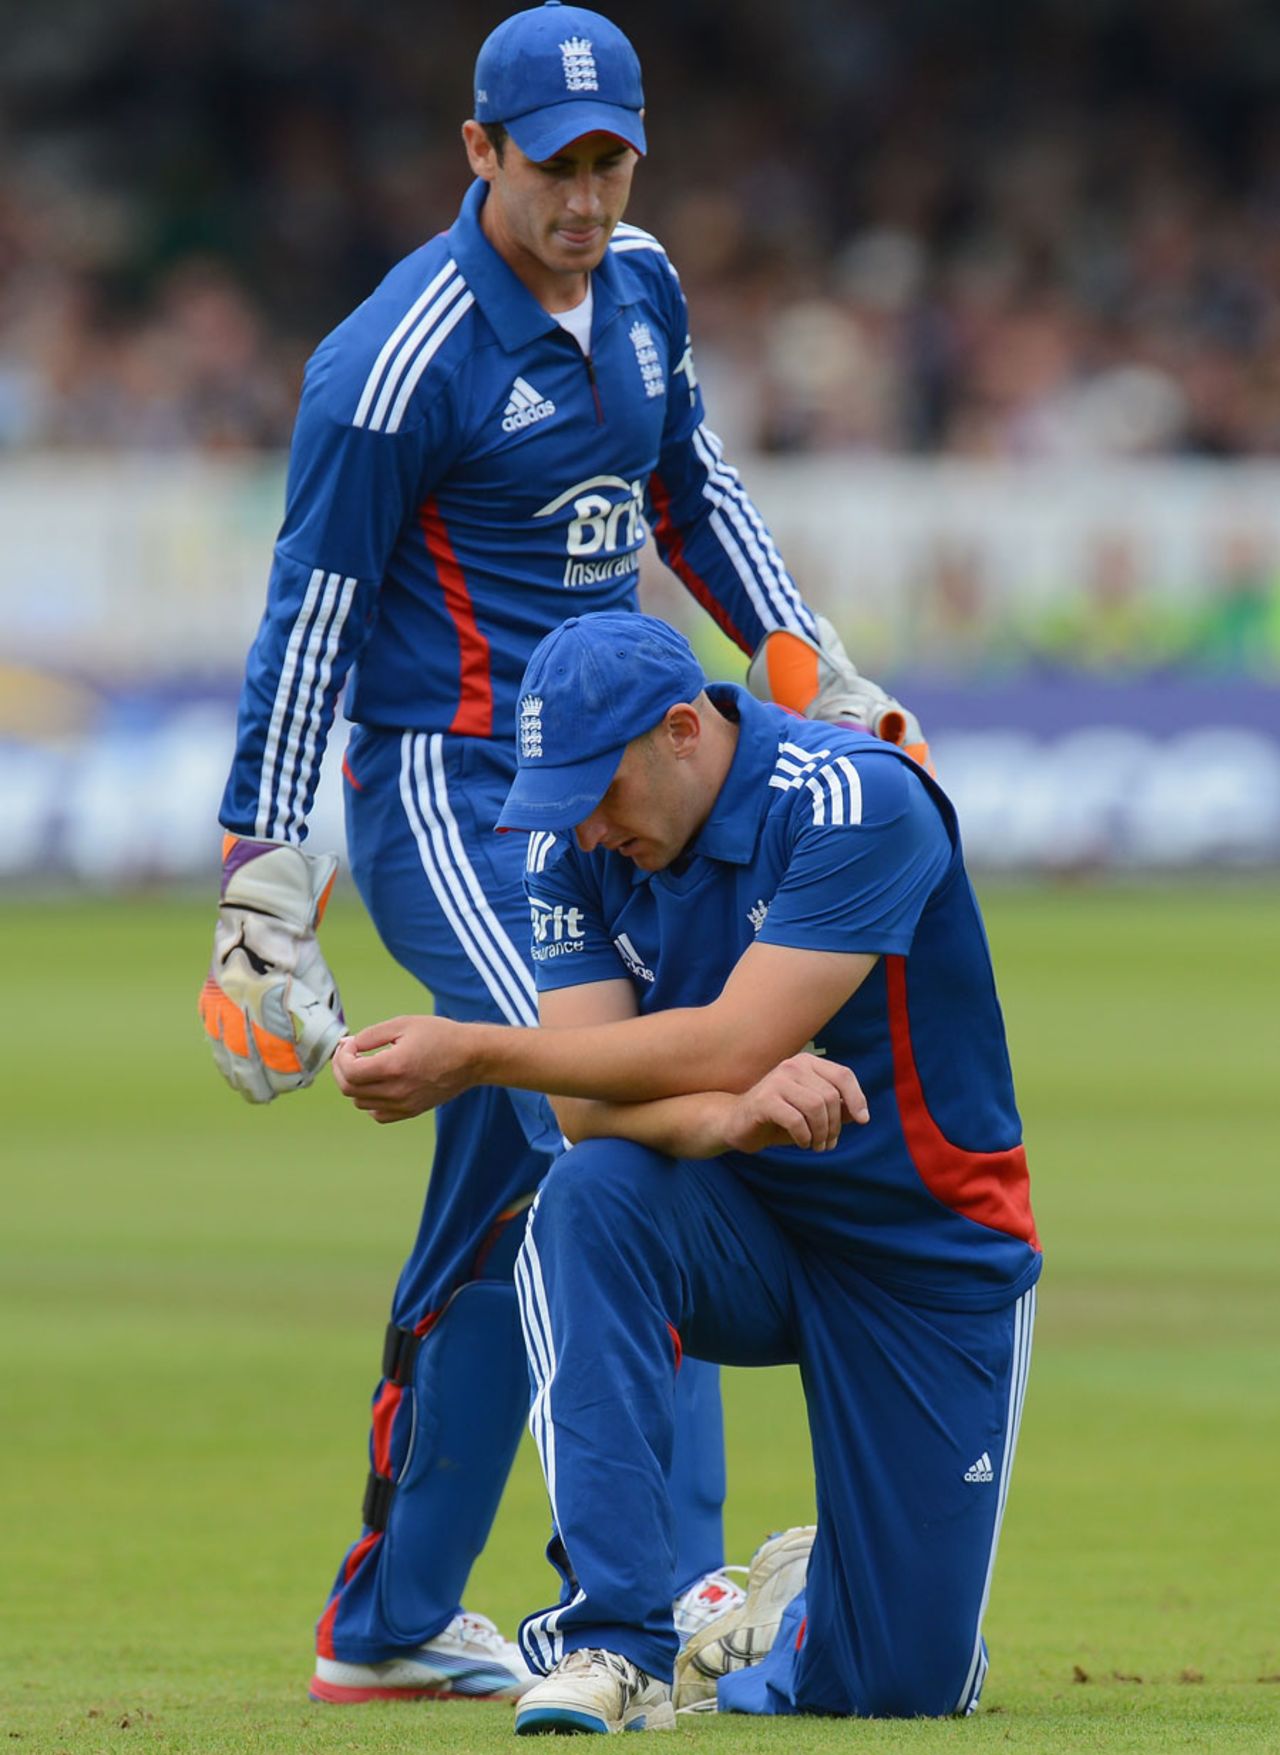 James Tredwell put down two catches at slip, England v South Africa, 4th ODI, Lord's, September 2, 2012